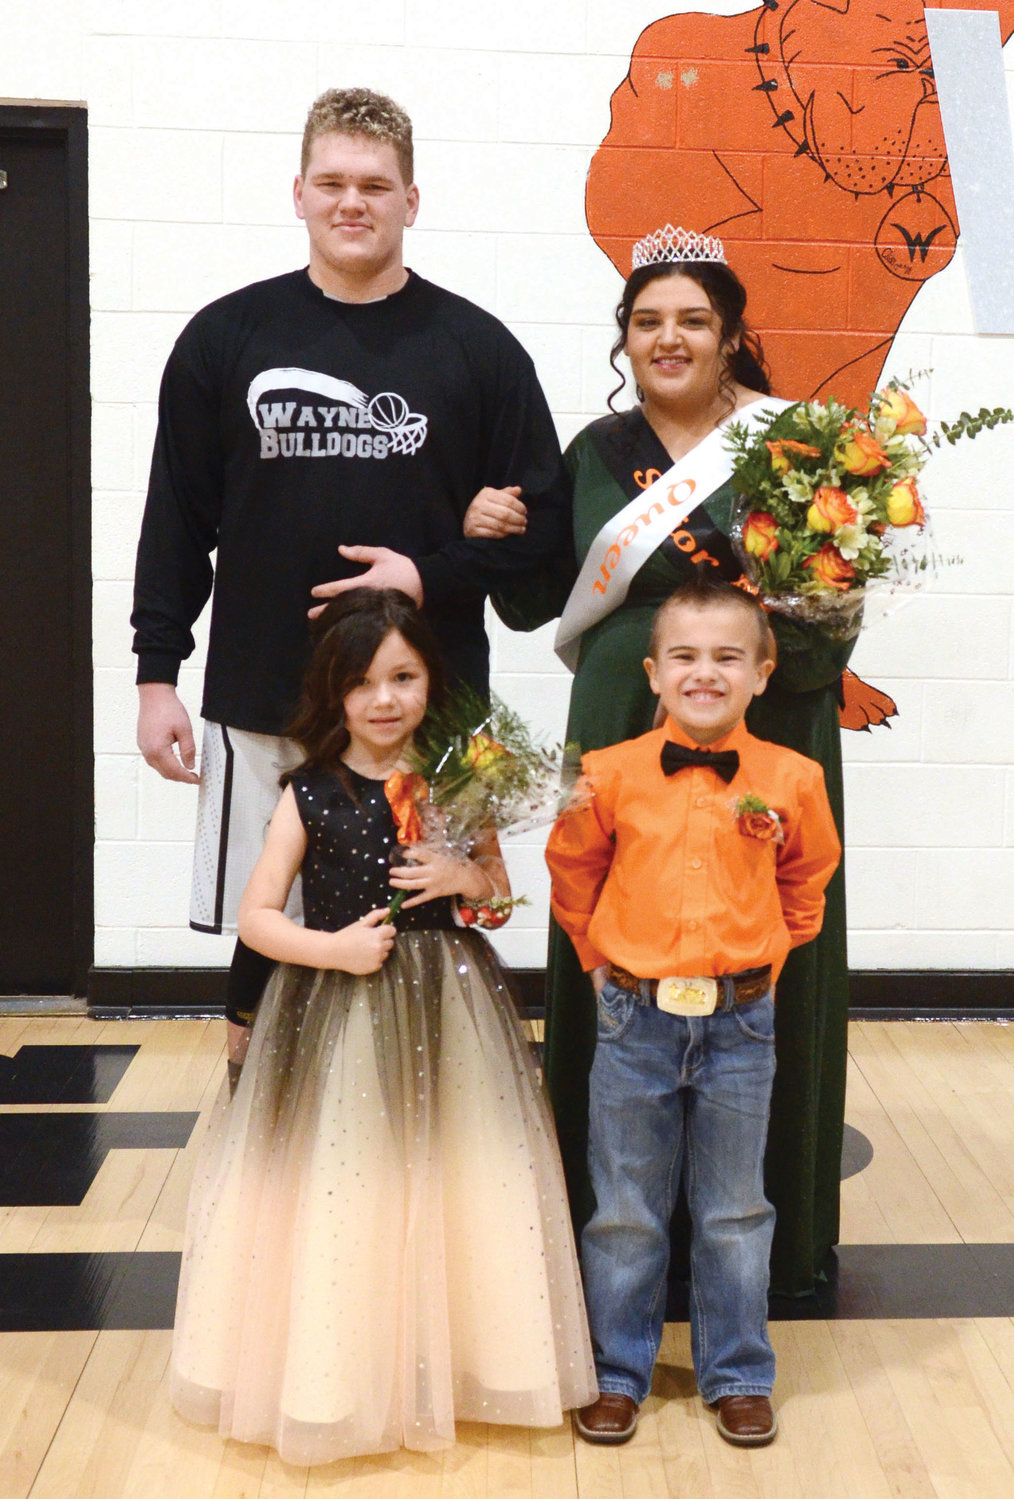 Wayne’s homecoming coronation Friday night concluded with Mayce Trejo being crowned queen and Andy Lee named king. The flower girl was Hayslee Smith and the crown bearer was Legend Adkins.